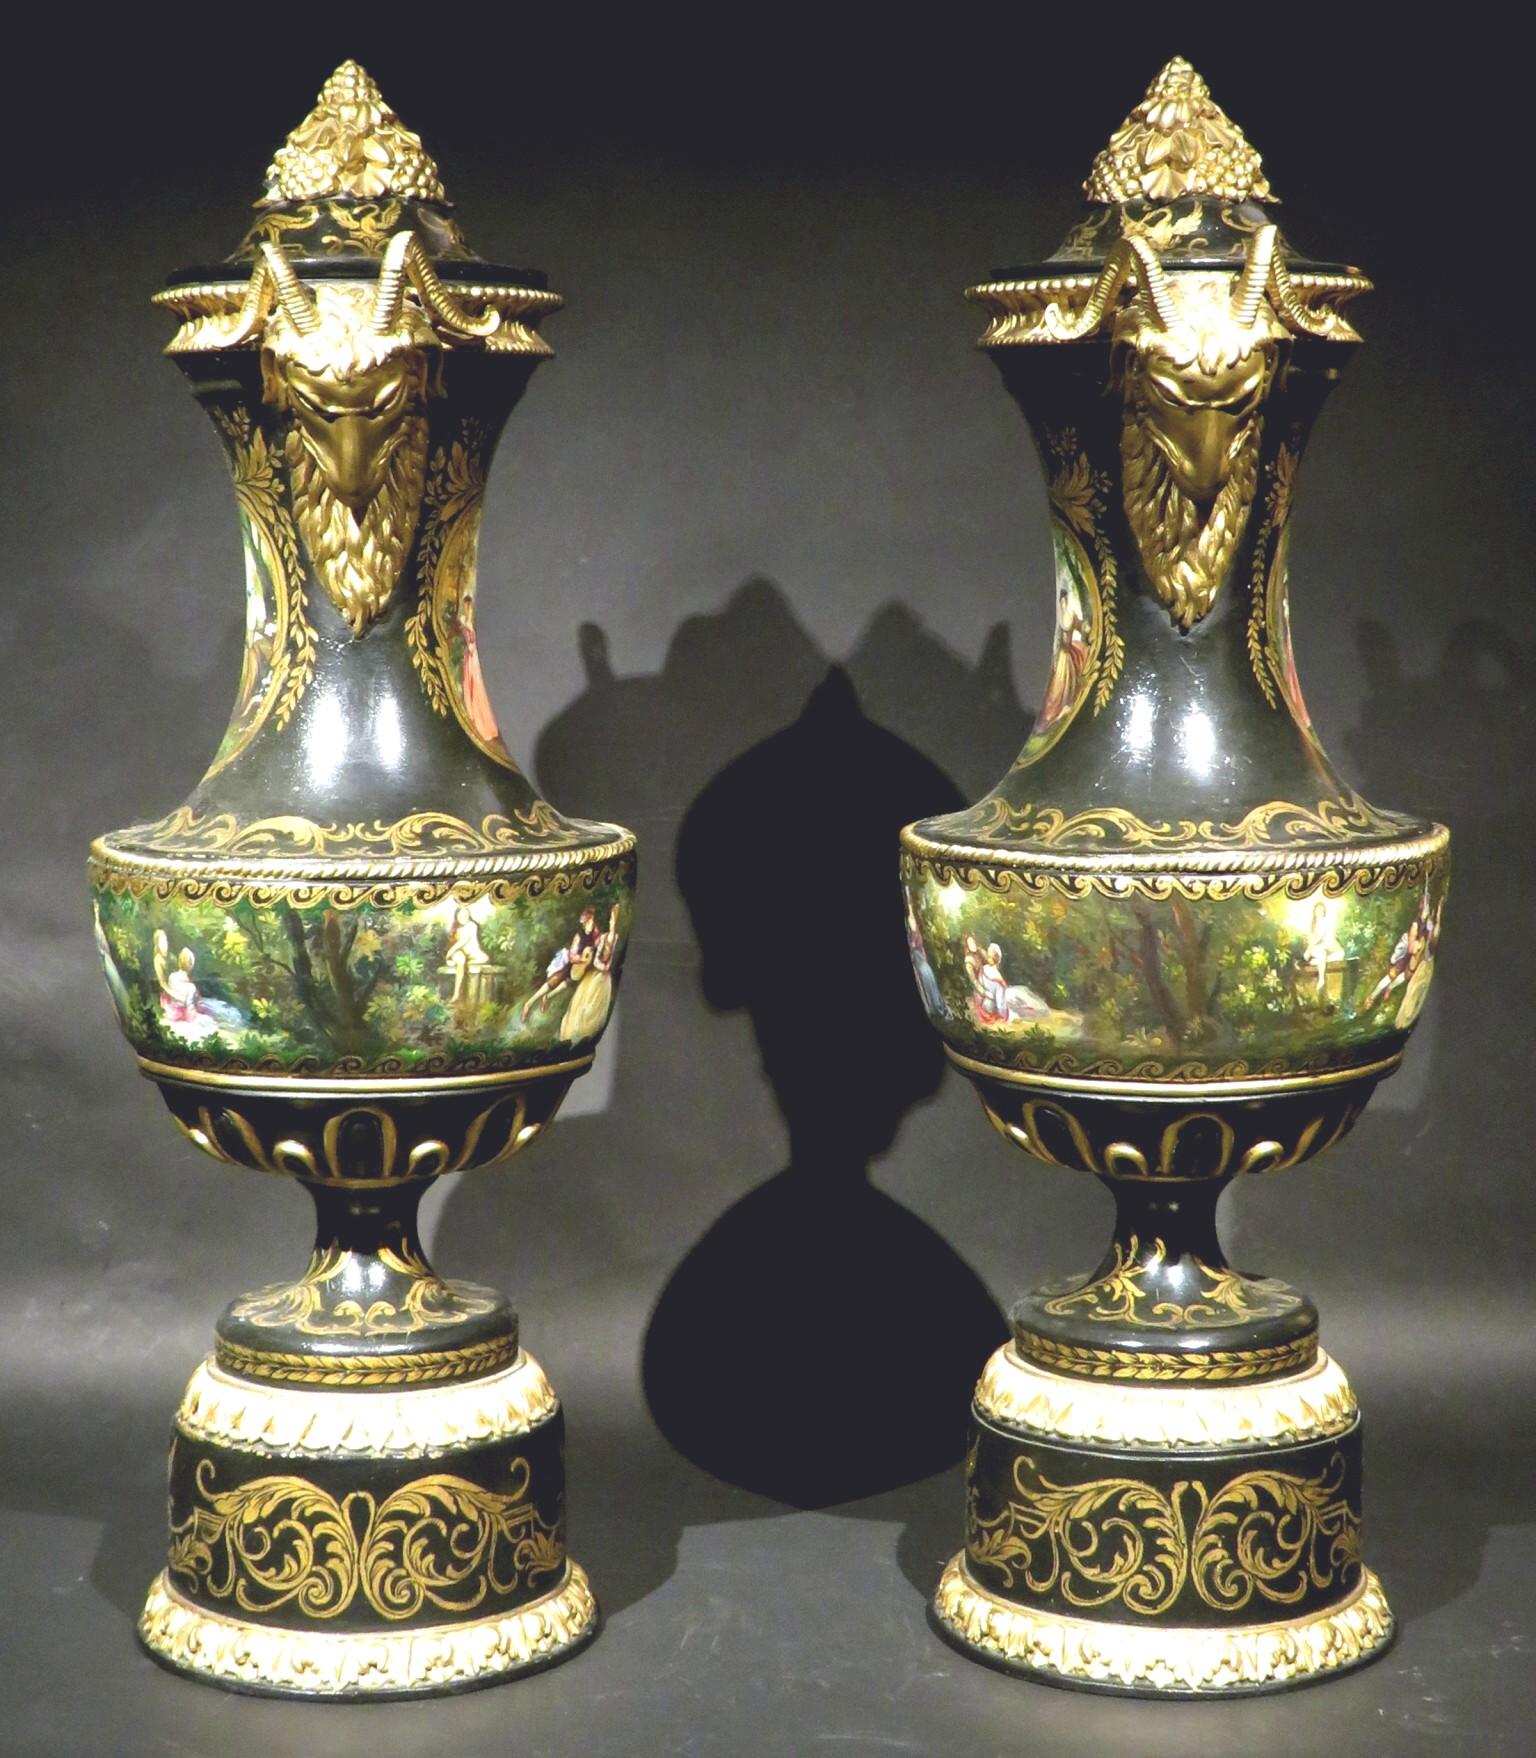 A most impressive & highly decorative pair of 19th century ebonized wooden urns, both fitted with detachable lids with gilded composition mounts, the bodies decorated overall with hand painted gilt motifs and romantic themed murals, the necks